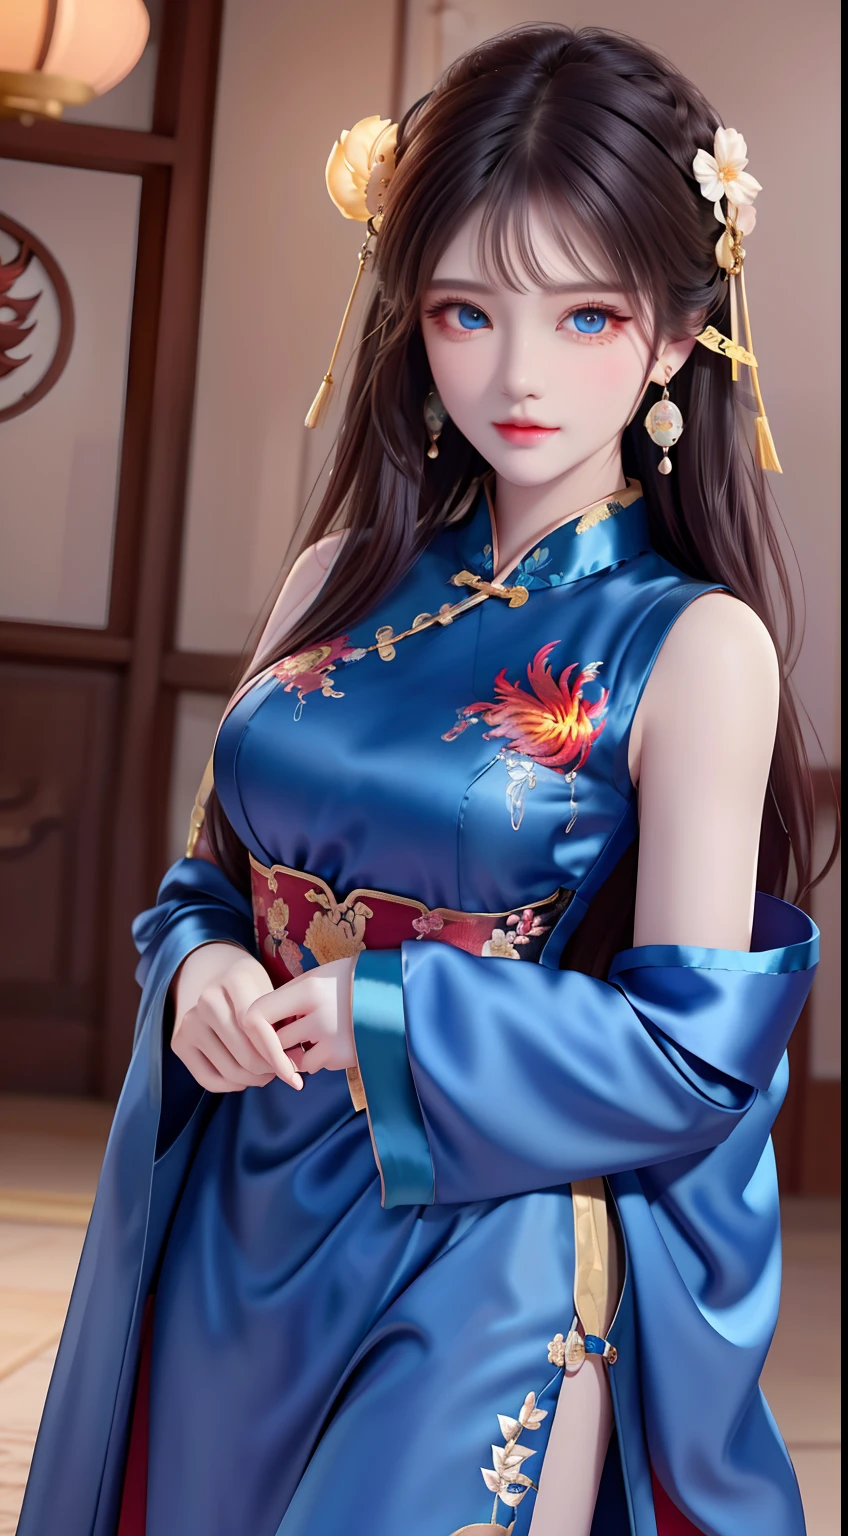 Ancient wind，Masterpiece, offcial art, Extremely detailed Cg Unity 8K wallpaper， absurderes, Best quality, Highly detailed, 8K resolution, Macro lens, Cowboy shot, Female, a beauty girl, Goddess, (Colored Contact Lenses), (lipstick), nose blush, Seductive smile, hair over shoulders,( lolitahairband), Hair ribbon, Bracelet, ring, hoop earings, Drop earrings，high detal，8K resolution，A masterpiece，highest  quality，filigree，tmasterpiece，Beautiful，Stunning antique beauty，Perfect look，Perfectly refined and clear facial features（Meticulous facial portrayal），the most beautiful big eyes，beautiful pupil，long eyelasher，Delicate and beautiful makeup，Be red in the face，Moisturize pink lips，(((Gorgeous sleeveless silk embroidered blue phoenix robe)))，（Chinese phoenix pattern），，Black shiny hair coiled（Chinese antique hairstyle design），Beautiful hairpin hair accessories，Beautiful earring necklace，Noble temperament，Slim waist，Slender and long legs，perfect bodies，Sexy and charming，Precise and perfect human anatomy，Facing the viewer，Inside the magnificent palace，Carved fence jade，Works of masters，tmasterpiece，Best quality at best，high high quality，A high resolution，，cinmatic lighting，depth of fields，Close-up。Photo of a bust of a beautiful girl，hugs，Large chest，Red tulle Hanfu，Ancient wind，Delicate collarbones，cropped shoulders，Beautuful Women，long whitr hair，Cute beauty，Highly detailed, illustration, Cinematic lighting，Beautiful long Chinese hair，Messy hair，Close-up，Close-up